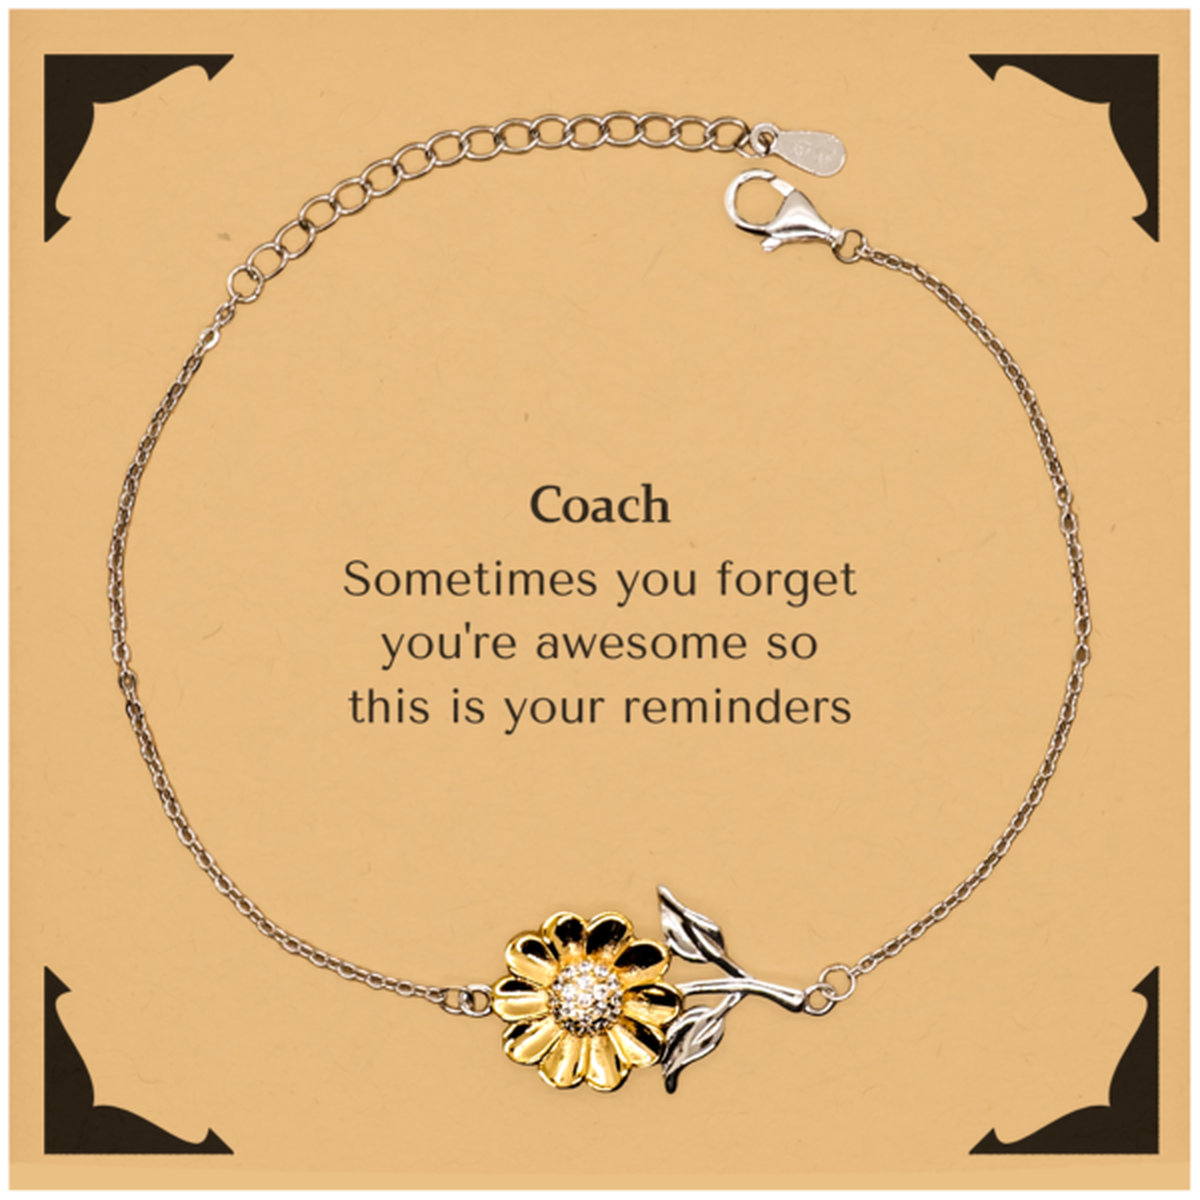 Sentimental Coach Sunflower Bracelet, Coach Sometimes you forget you're awesome so this is your reminders, Graduation Christmas Birthday Gifts for Coach, Men, Women, Coworkers